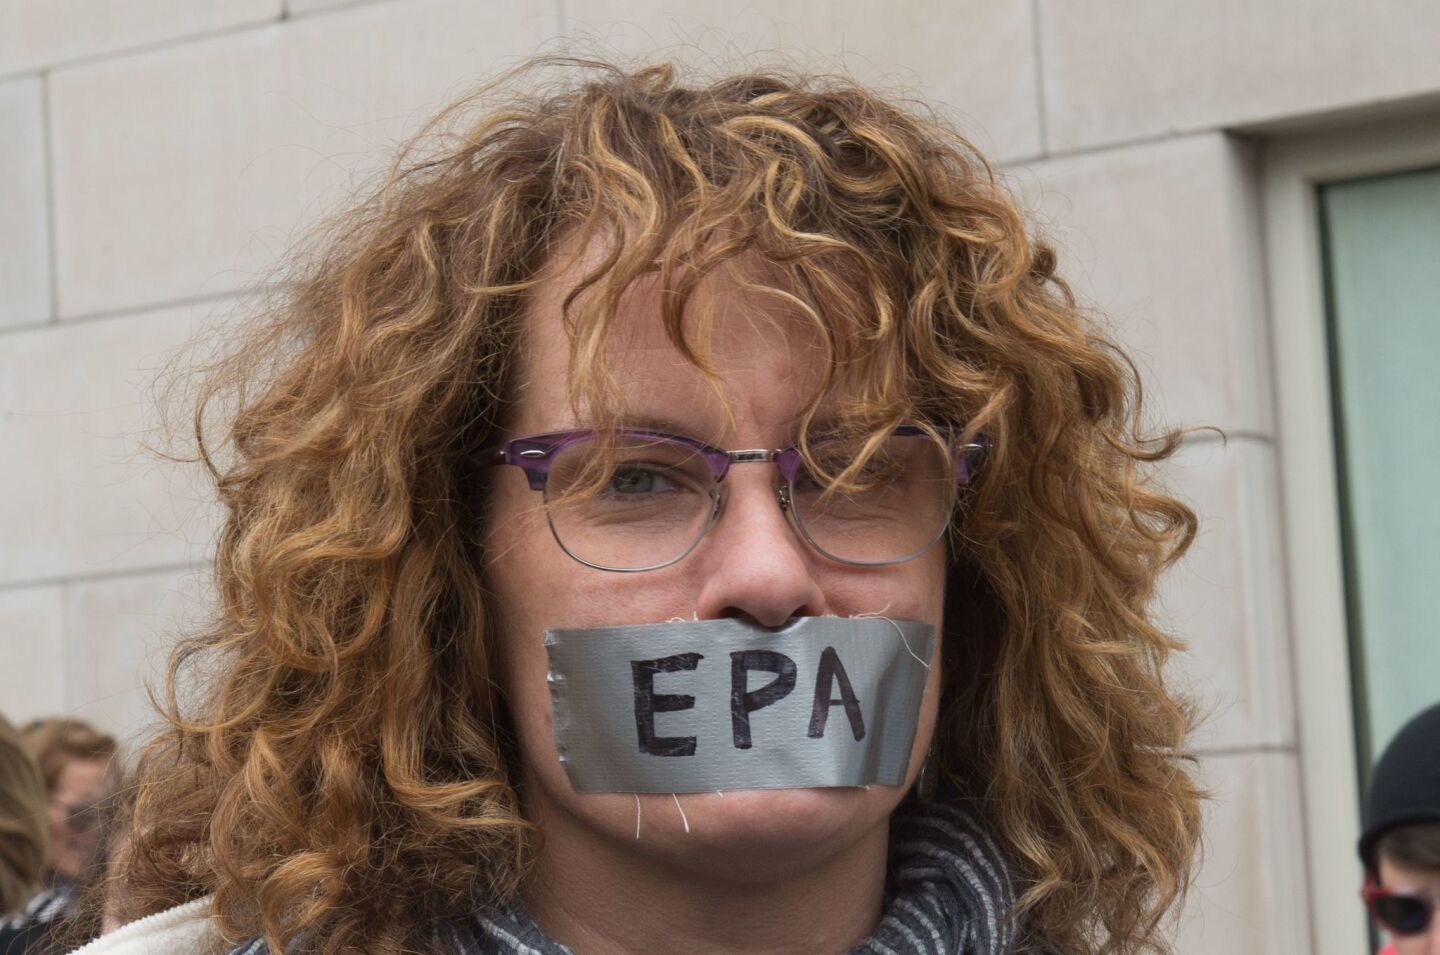 An activist wears tape with a message over her mouth at a rally before the March for Science in New York.